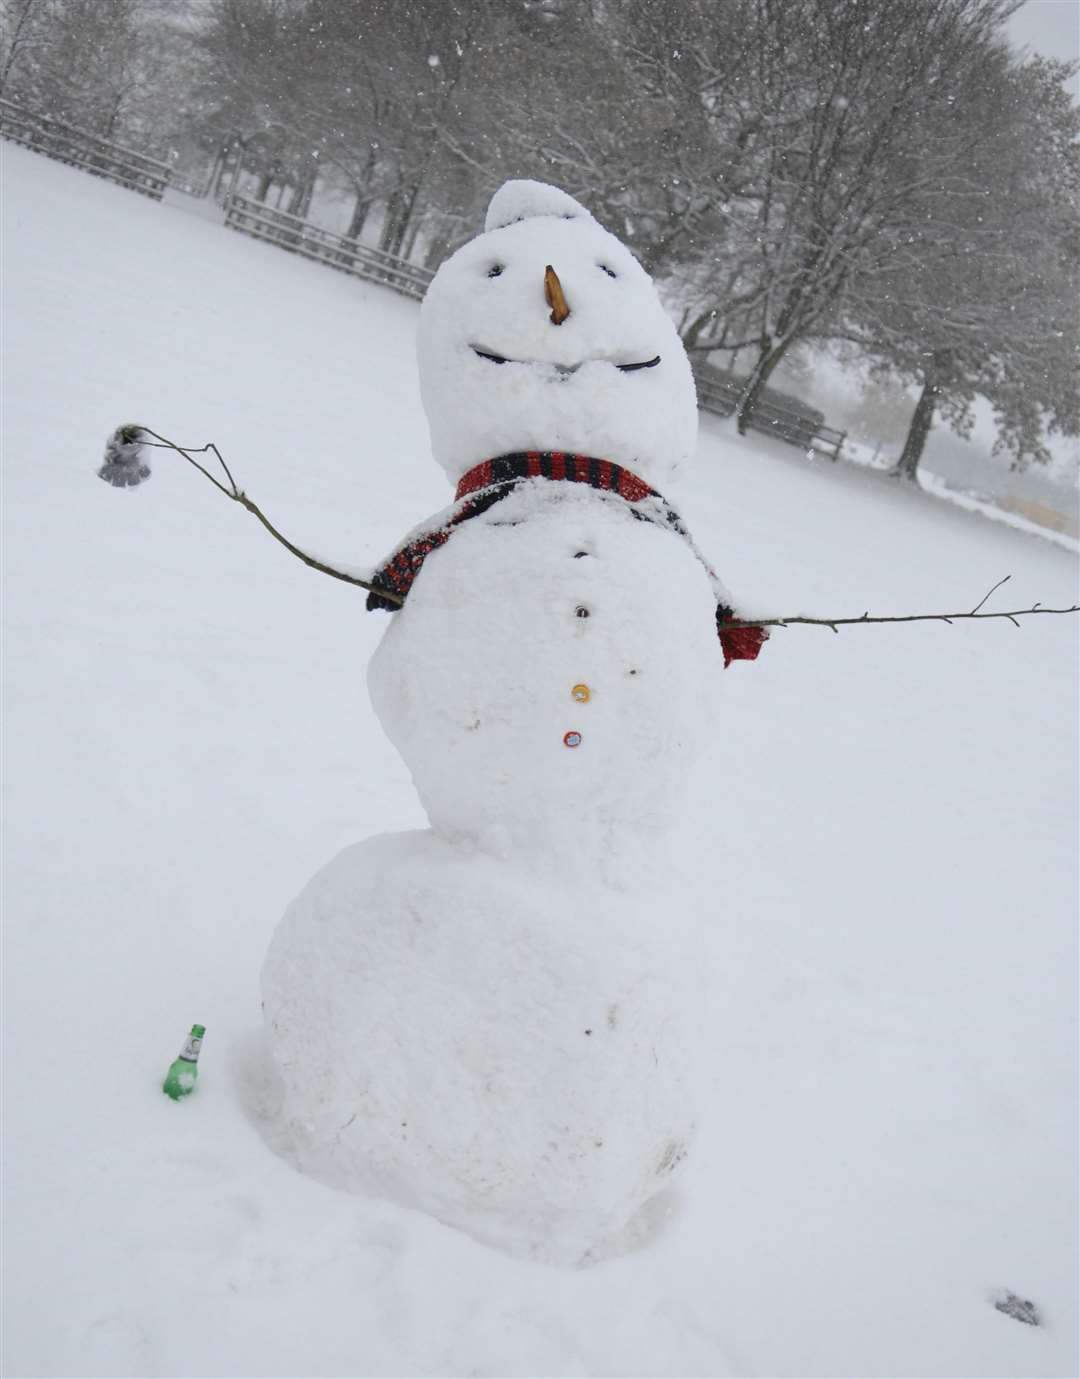 This snowman was built at the Kent County Showground in 2010